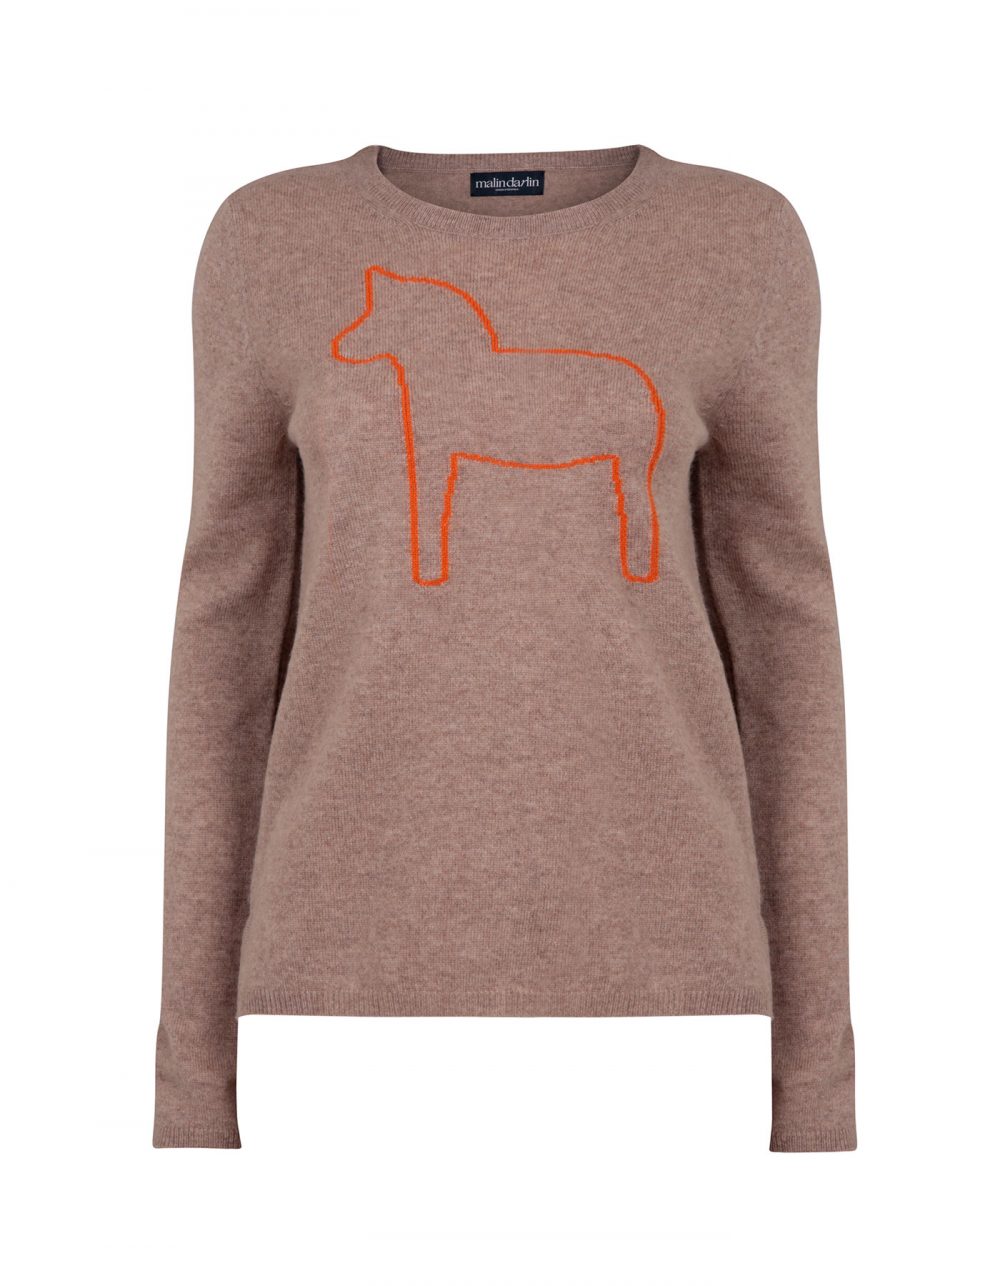 Photo of malin darlin Dalahast horse cashmere jumpers, a pony depicted on beige cashmere, against a white background.